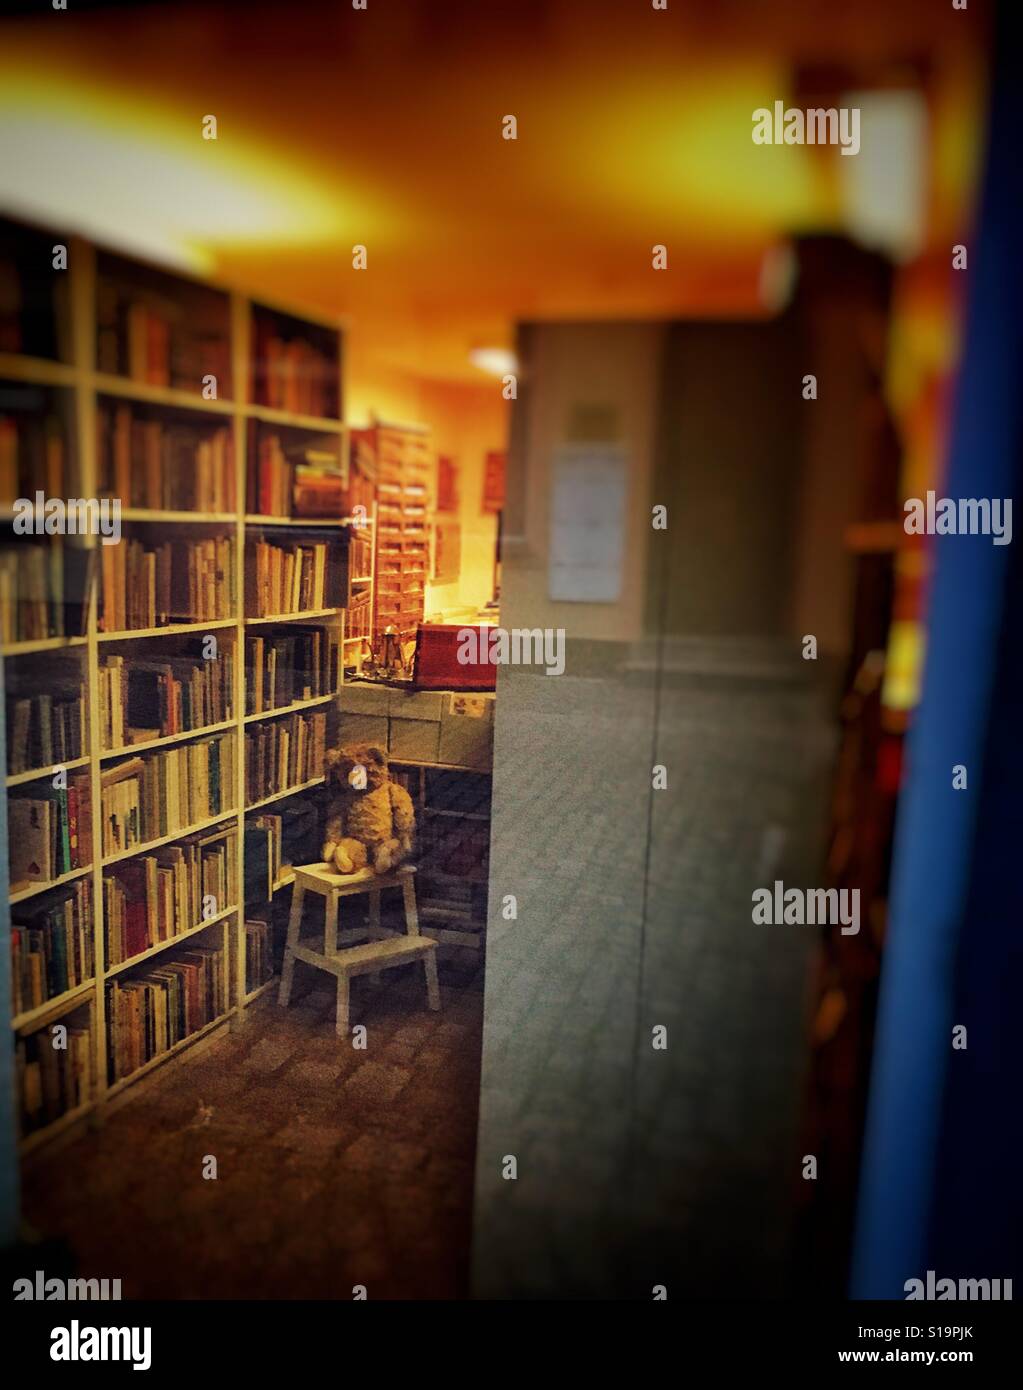 View through a window - library and a teddy bear on a small ladder nearby Stock Photo